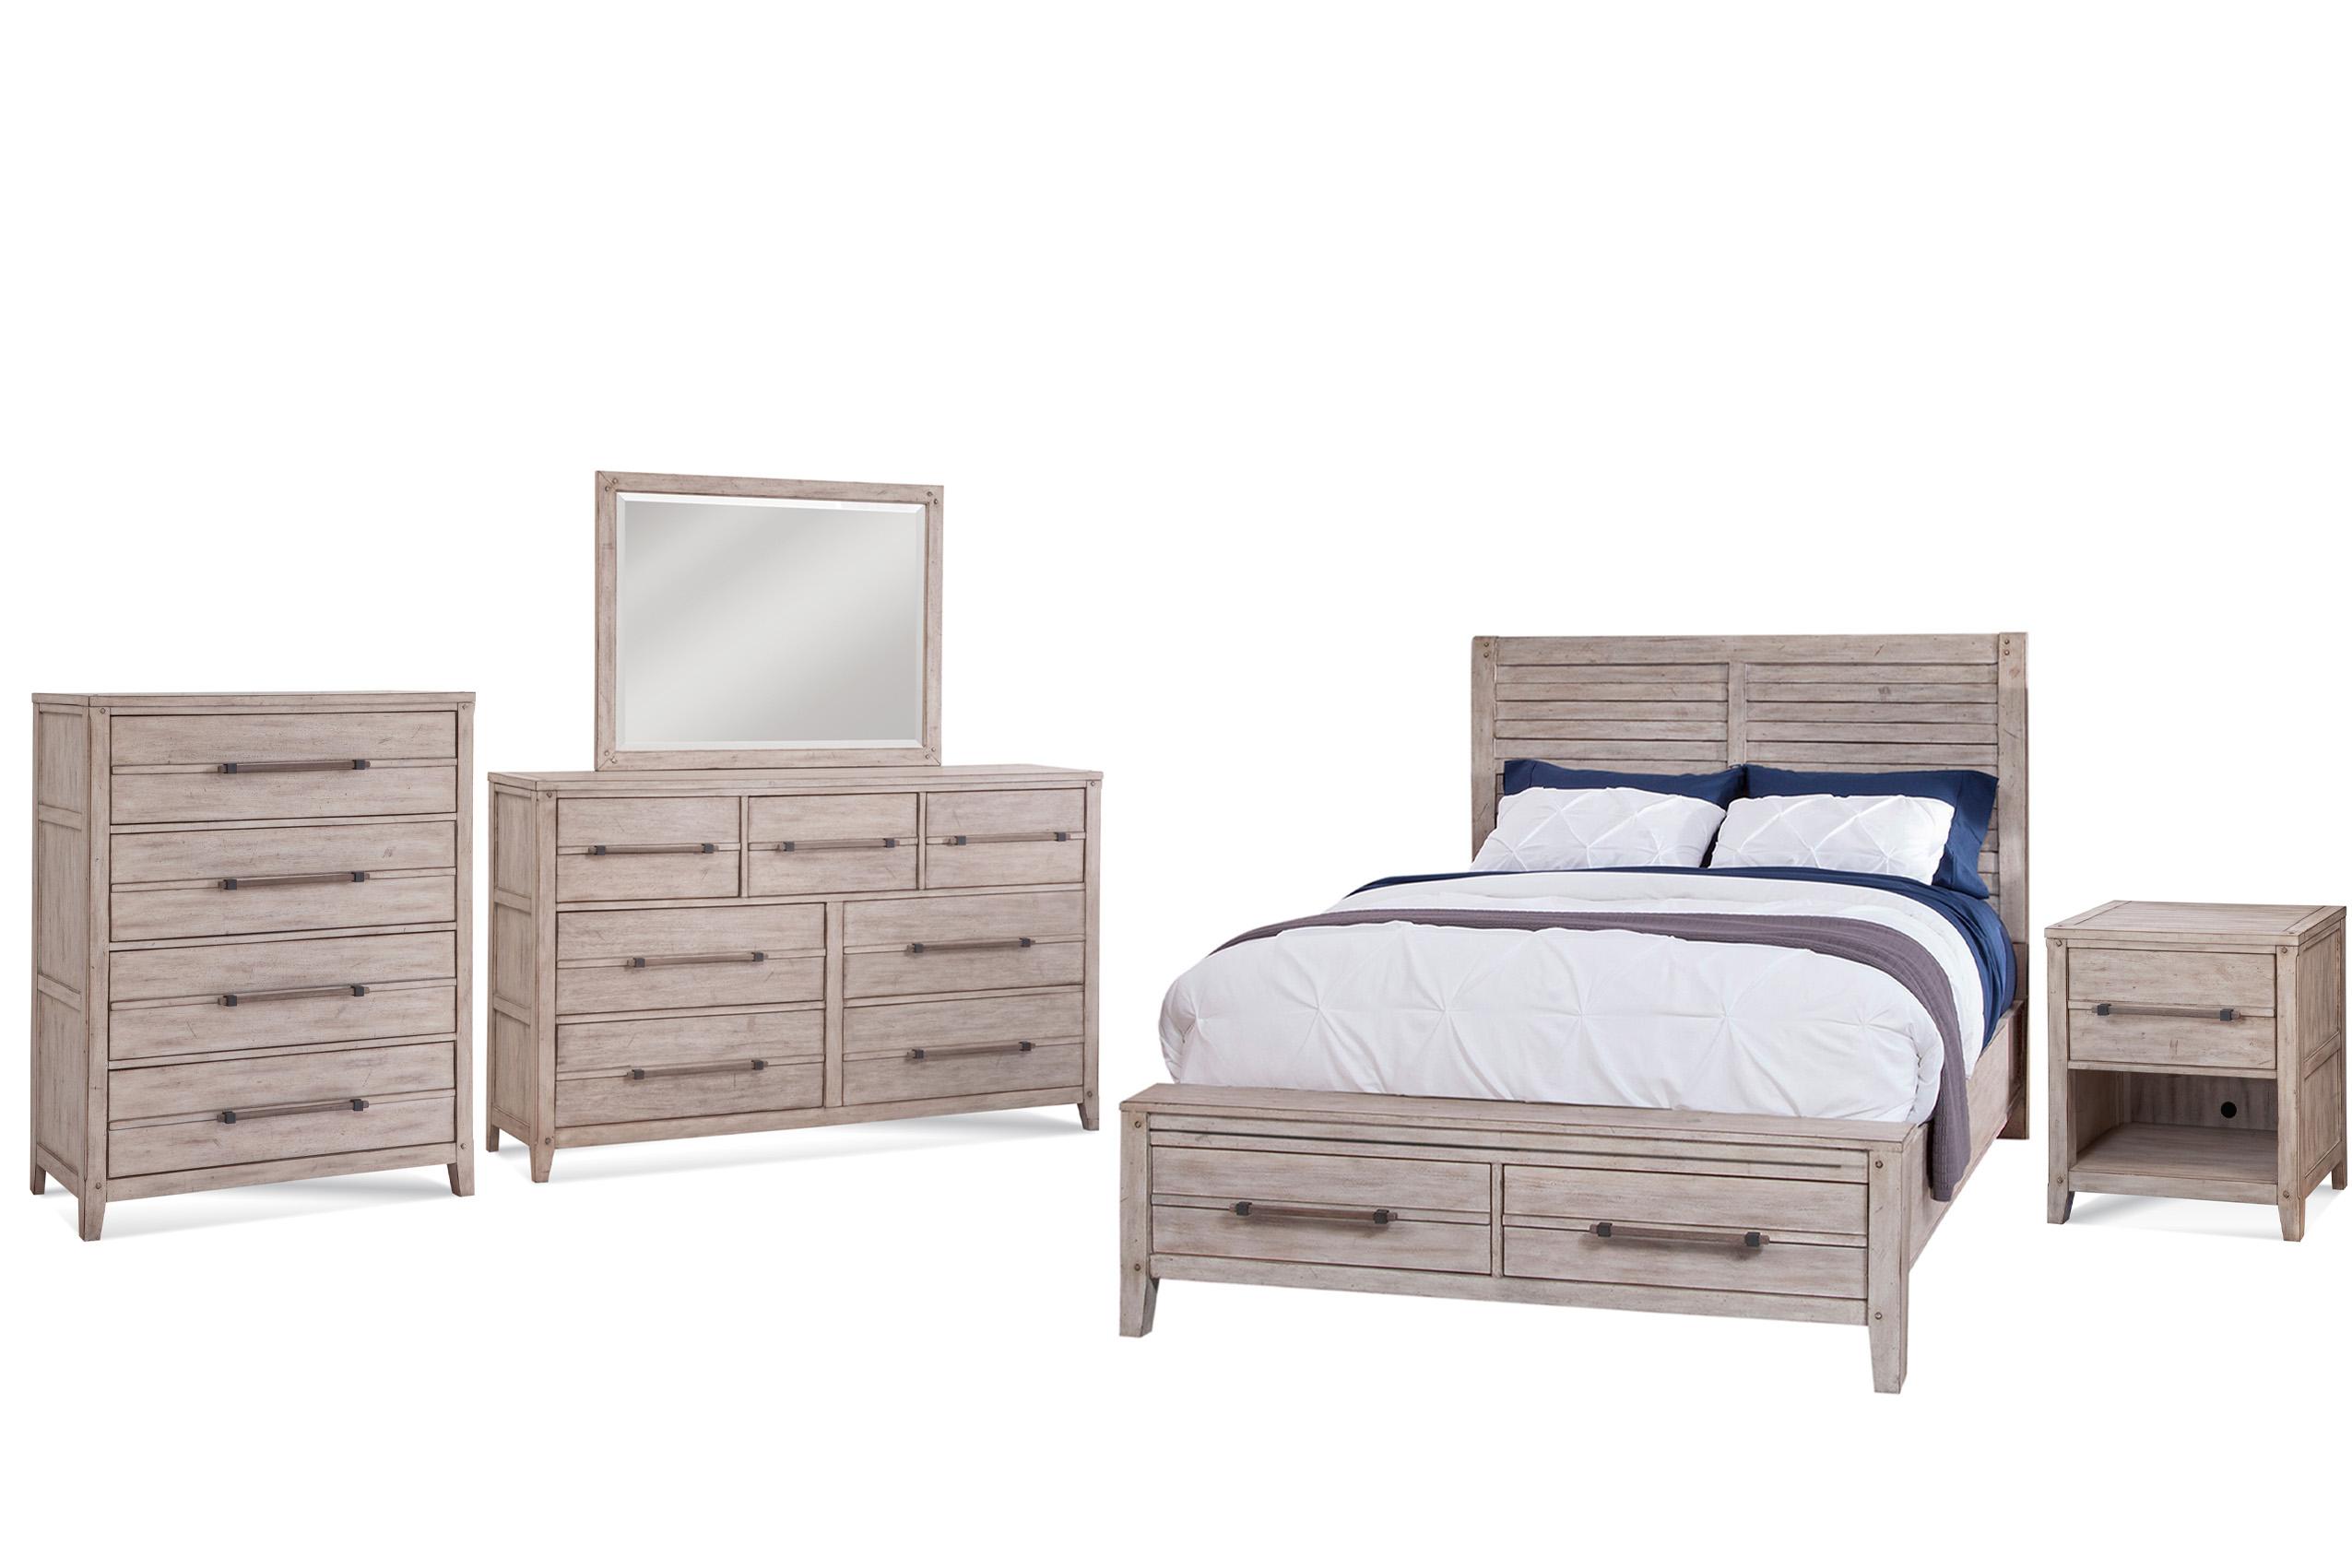 Classic, Traditional Panel Bedroom Set AURORA 2810-50PSB 2810-QPNST-5PC in whitewash 